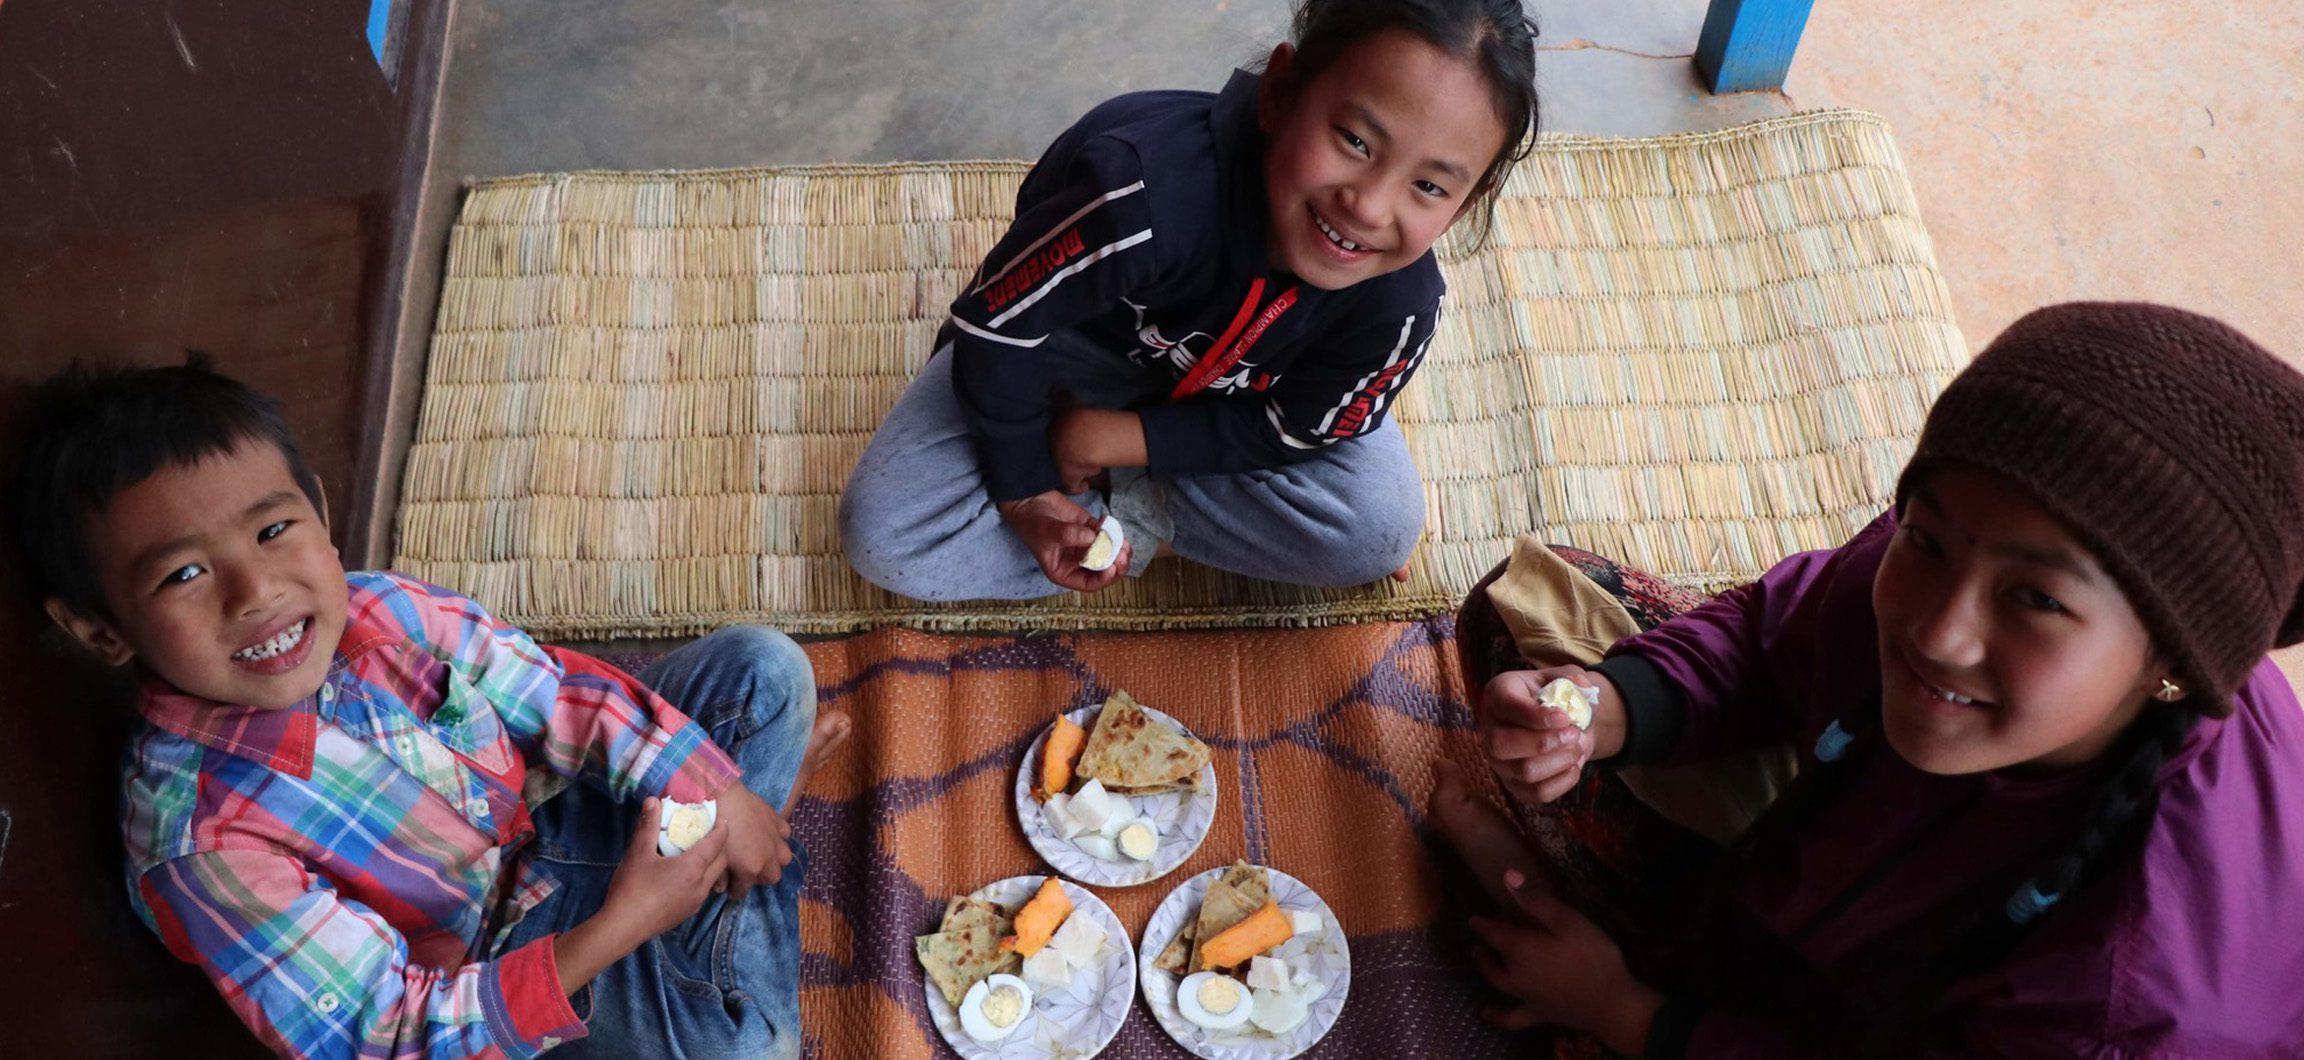 three smiling children sit on the floor together with nutritious food on the plates in front of them